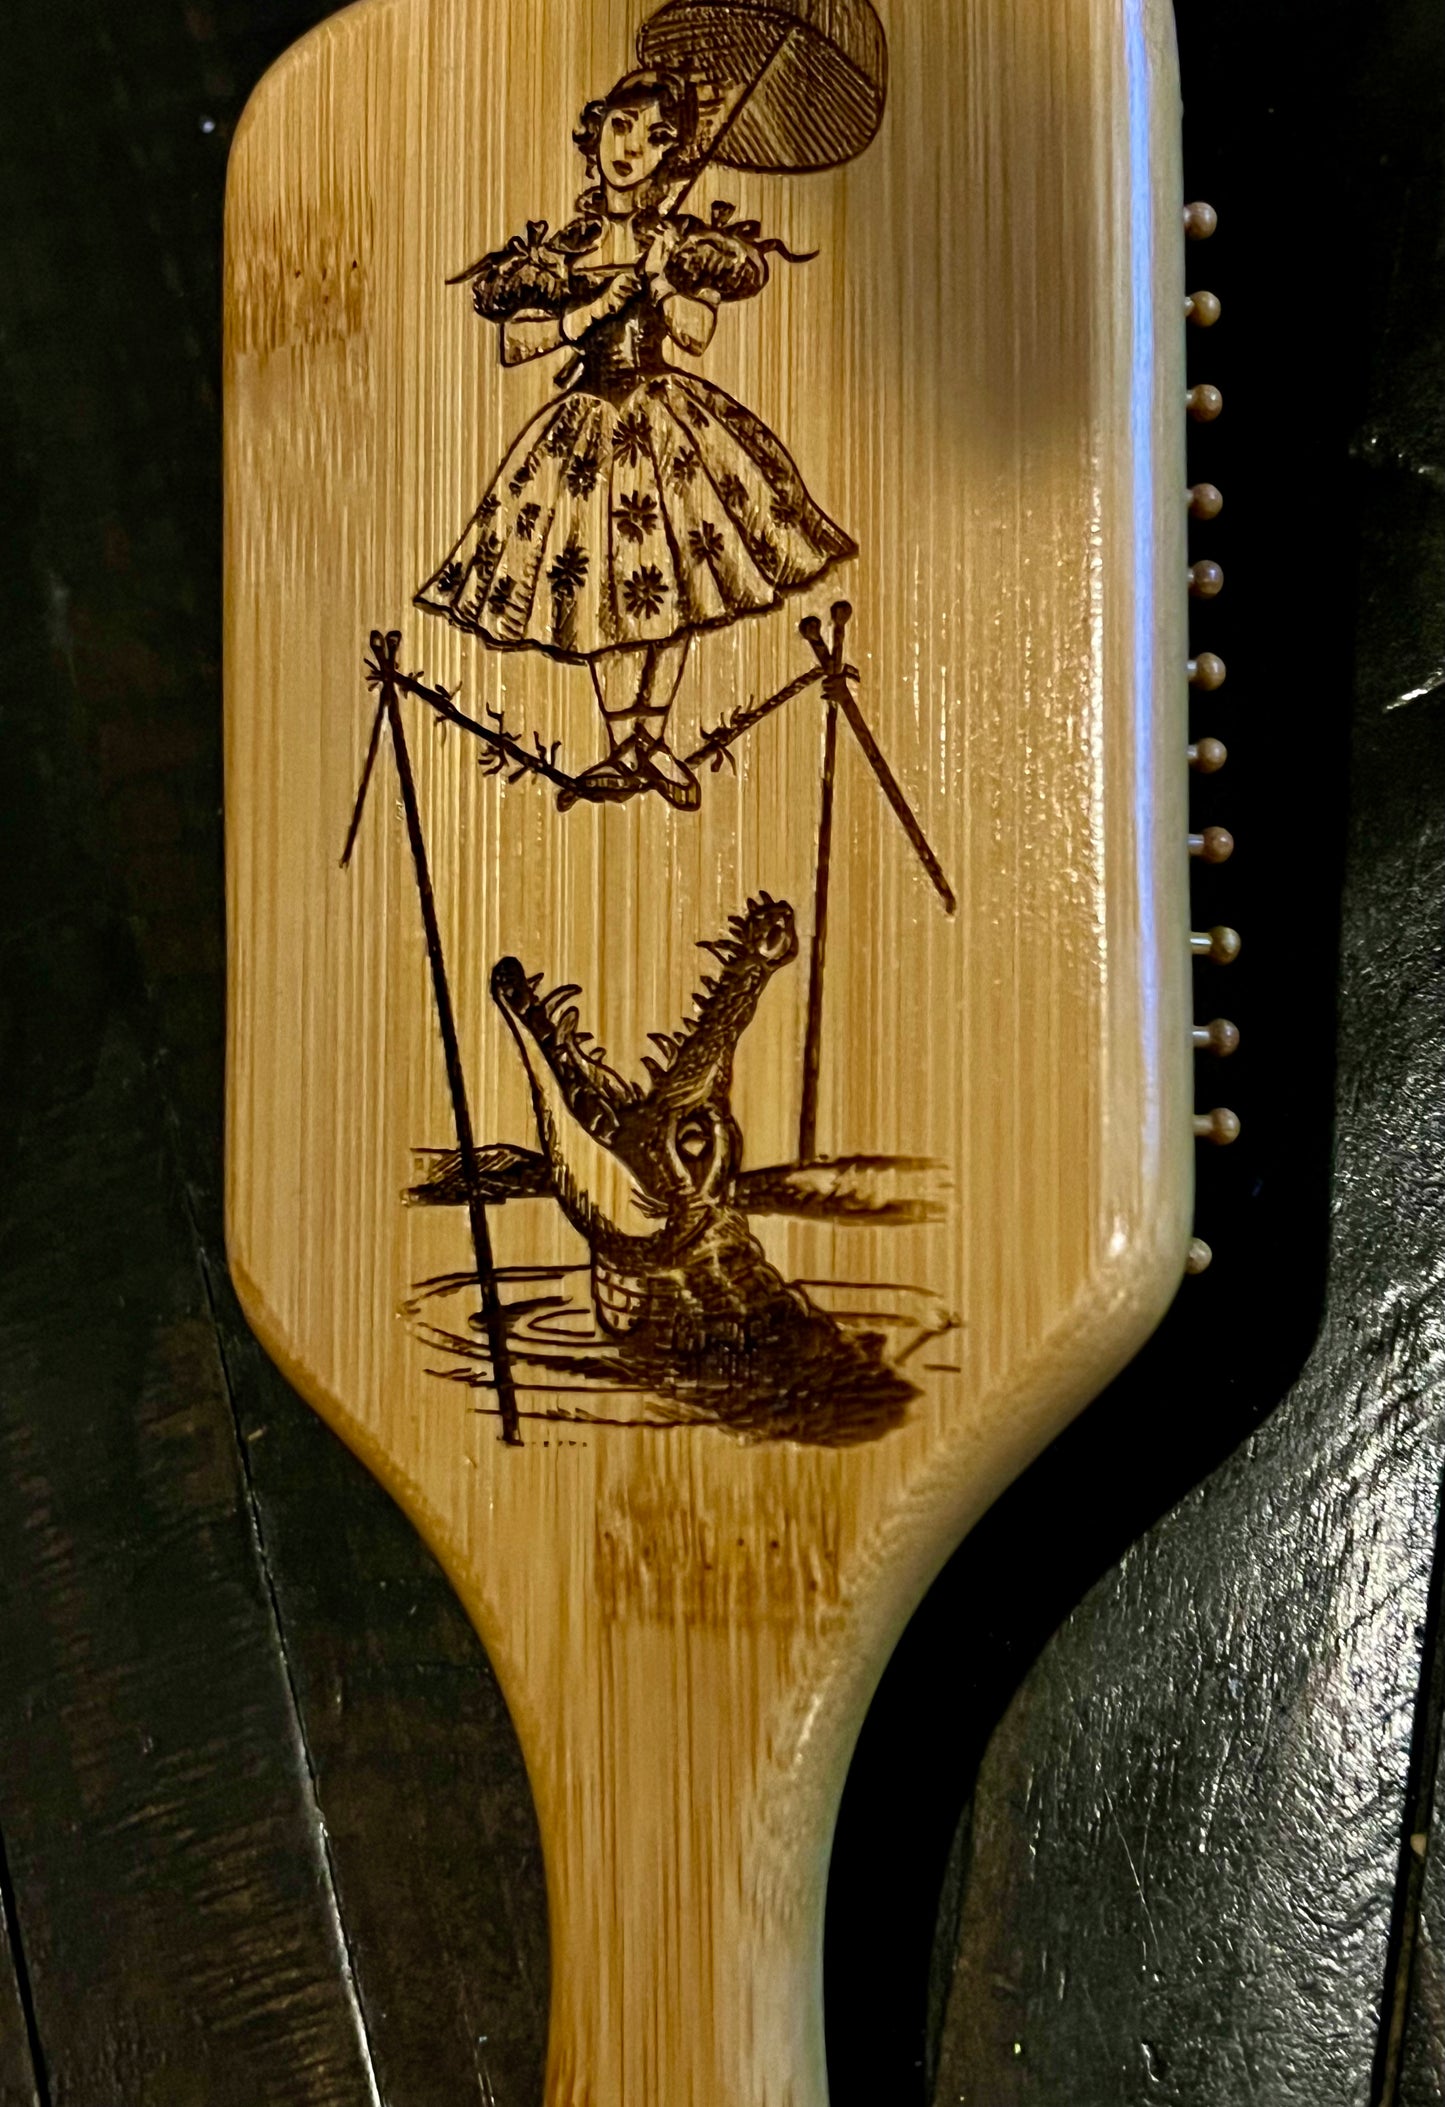 Hairbrush - Haunted Stretching Portrait Tightrope Walker